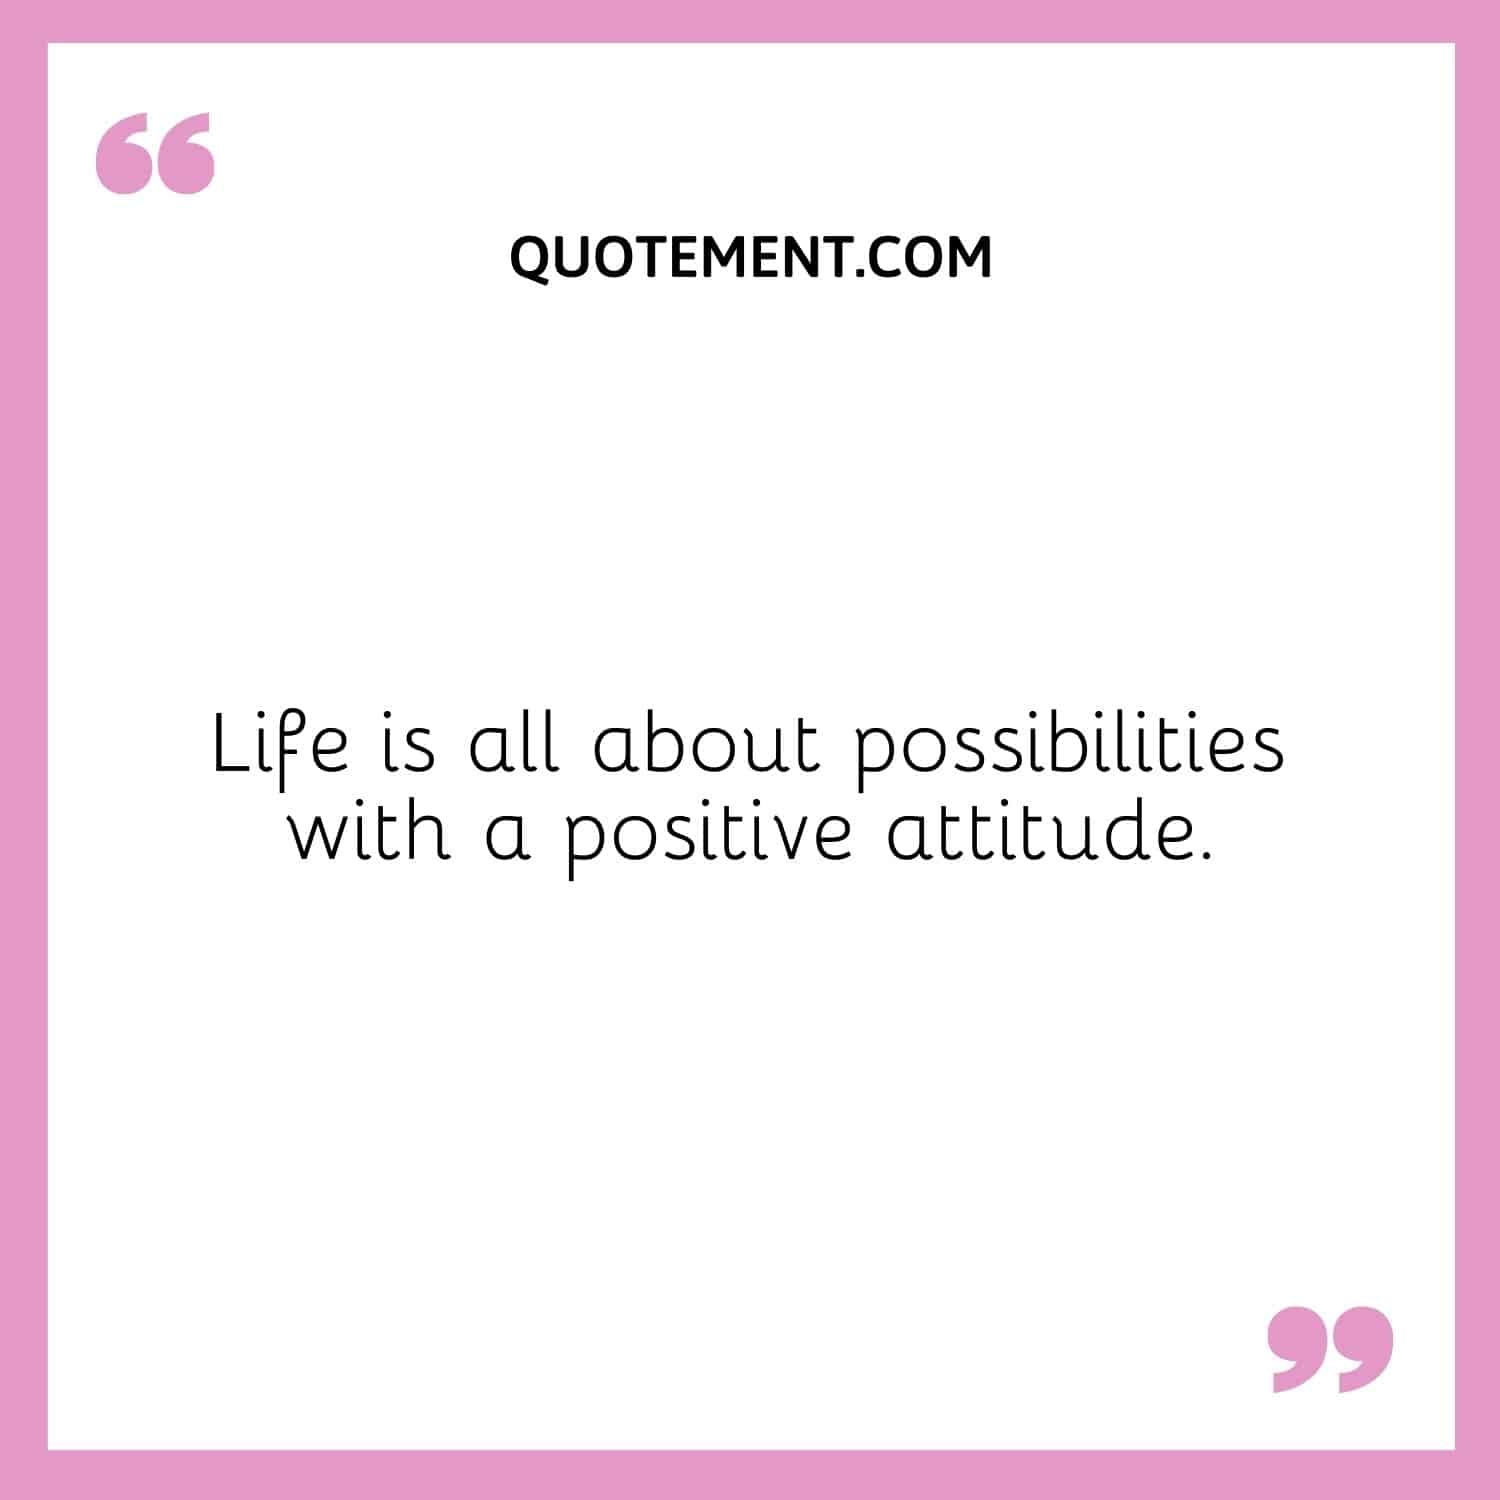 Life is all about possibilities with a positive attitude.